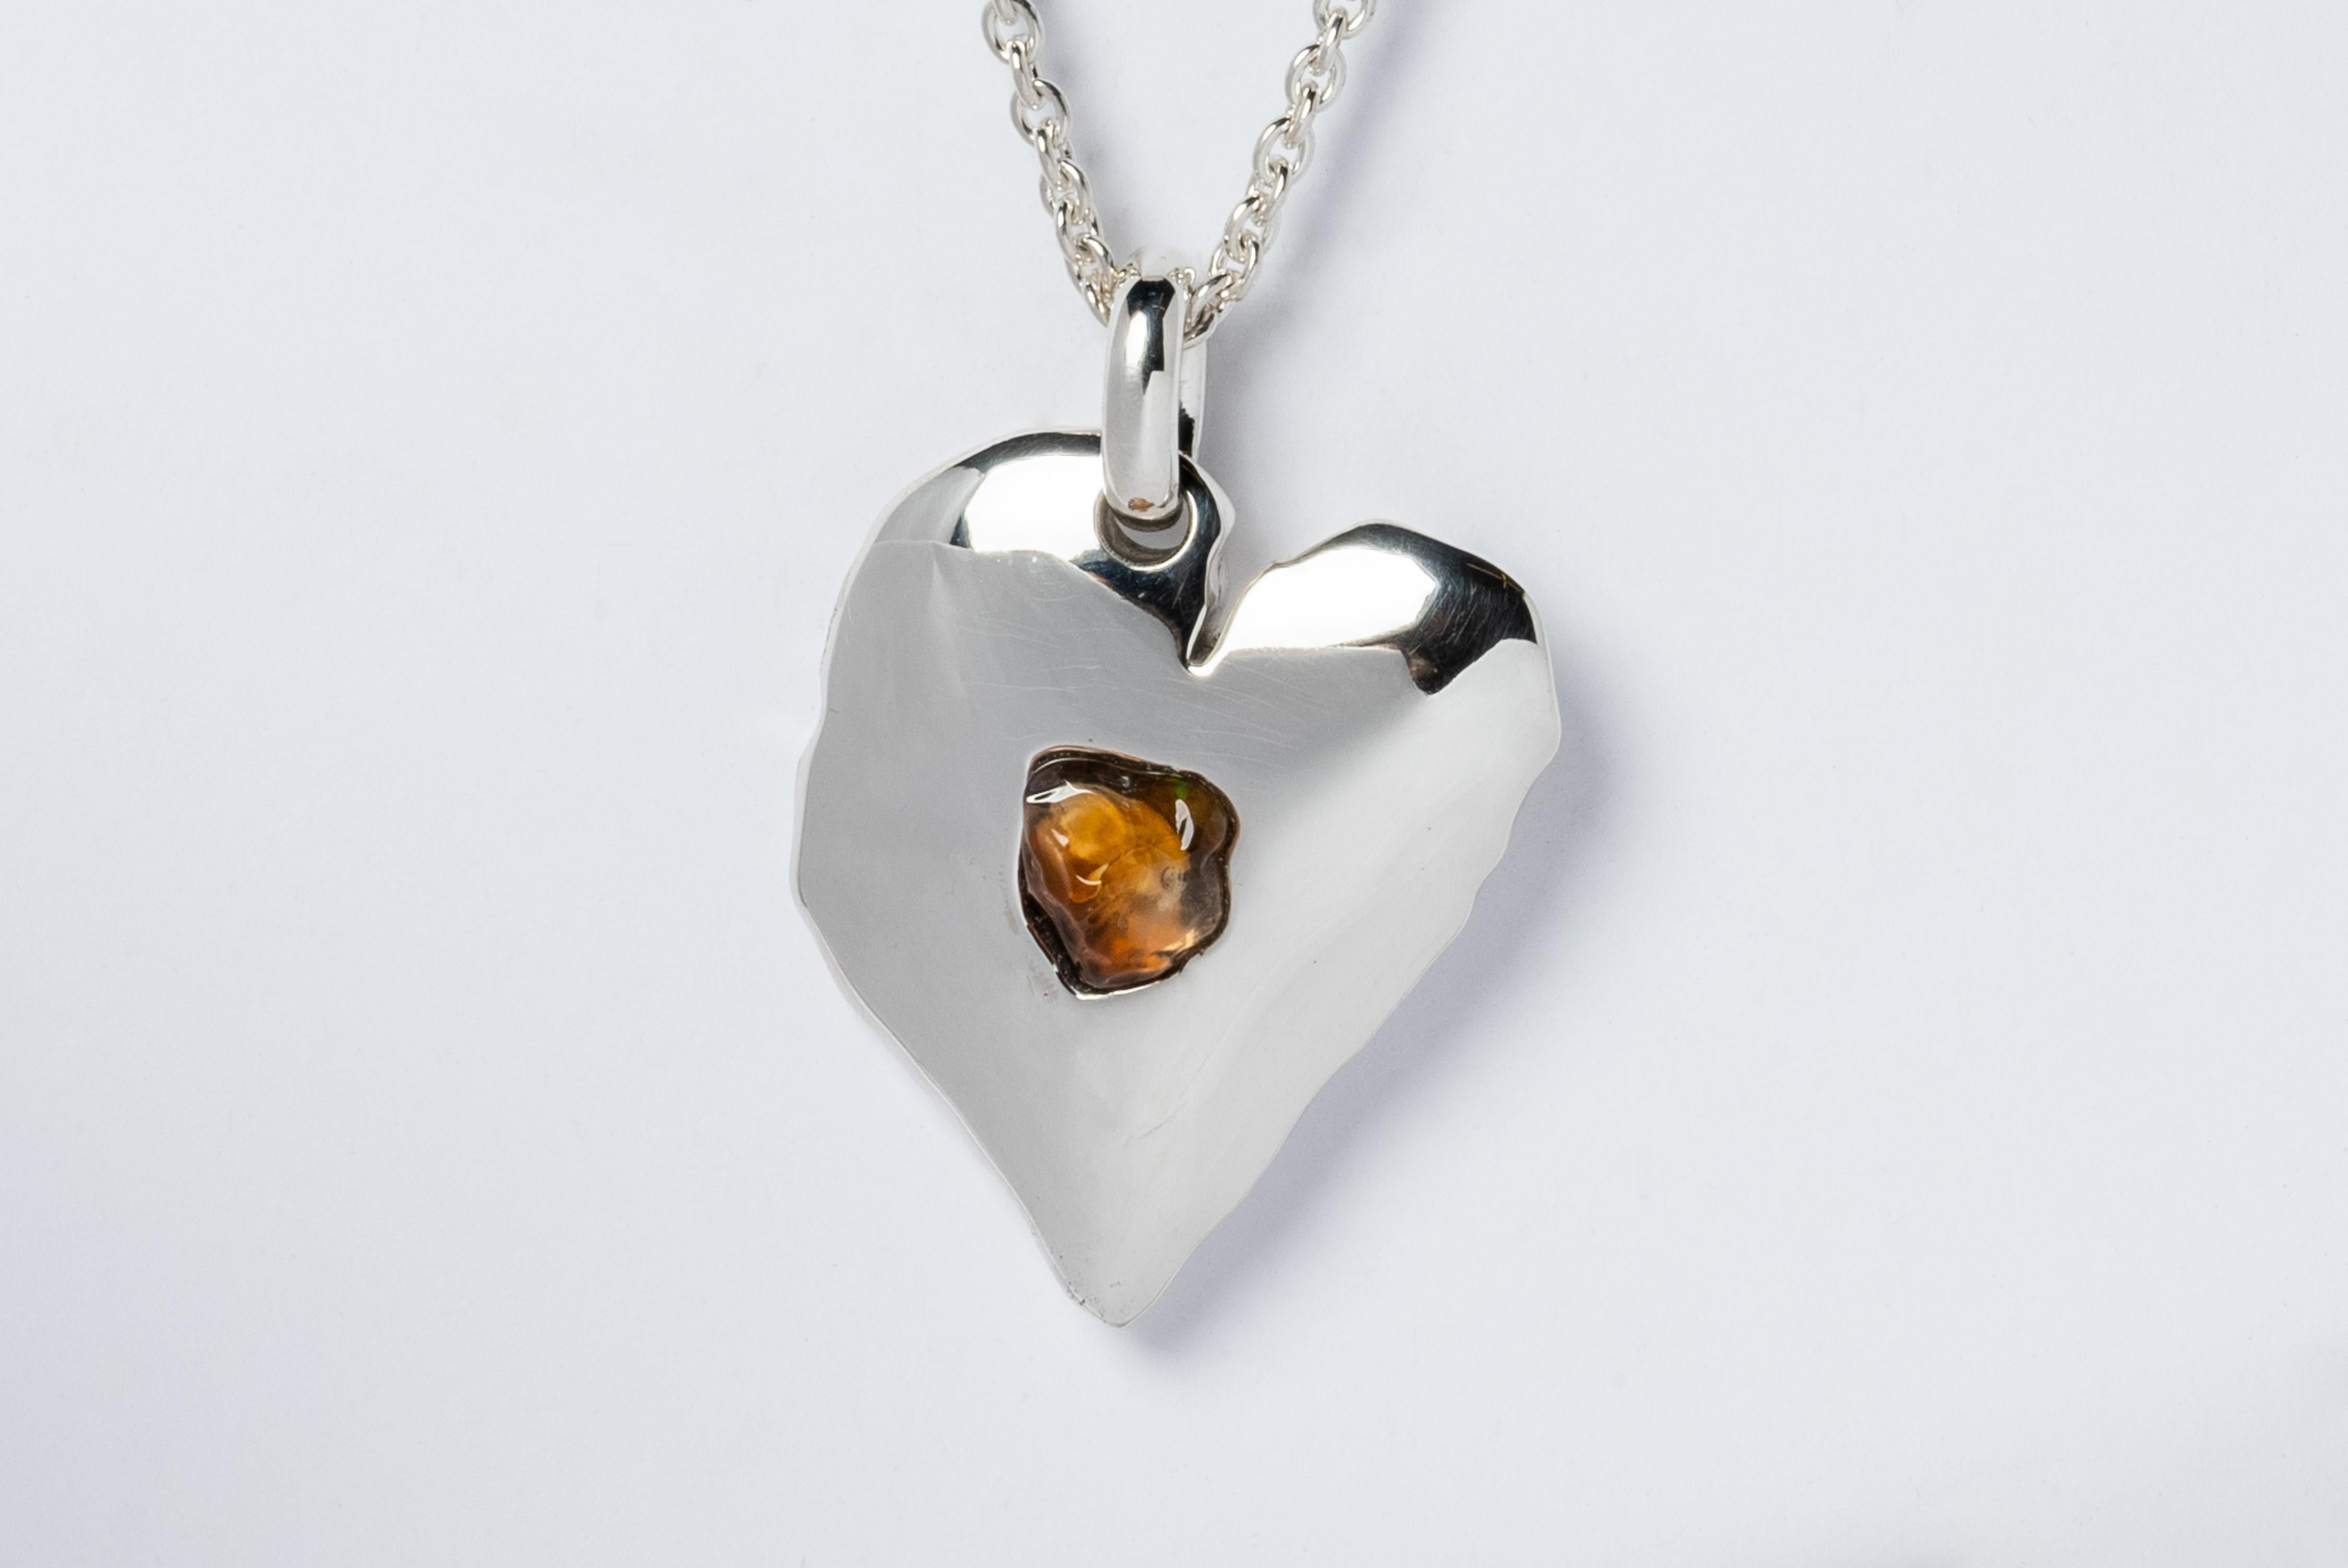 Jazz's Heart Necklace in polished sterling silver and a slab of rough opal. This series is based on a heart that Jazz, Evan’s daughter, drew directly on his chest when she was five years old. That day they went and had it tattooed directly onto